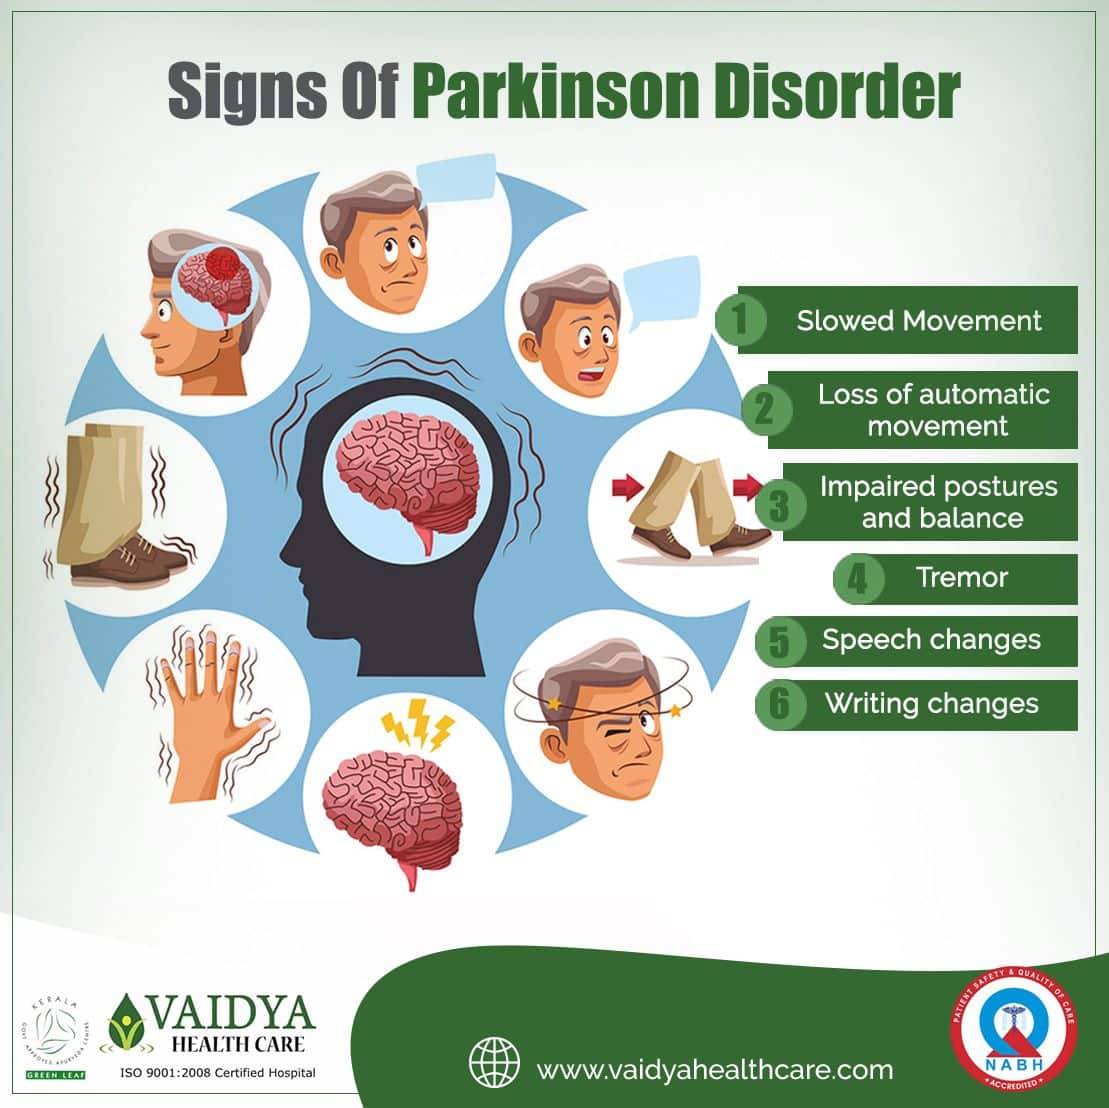 What Is the Best Treatment for Parkinson Disease